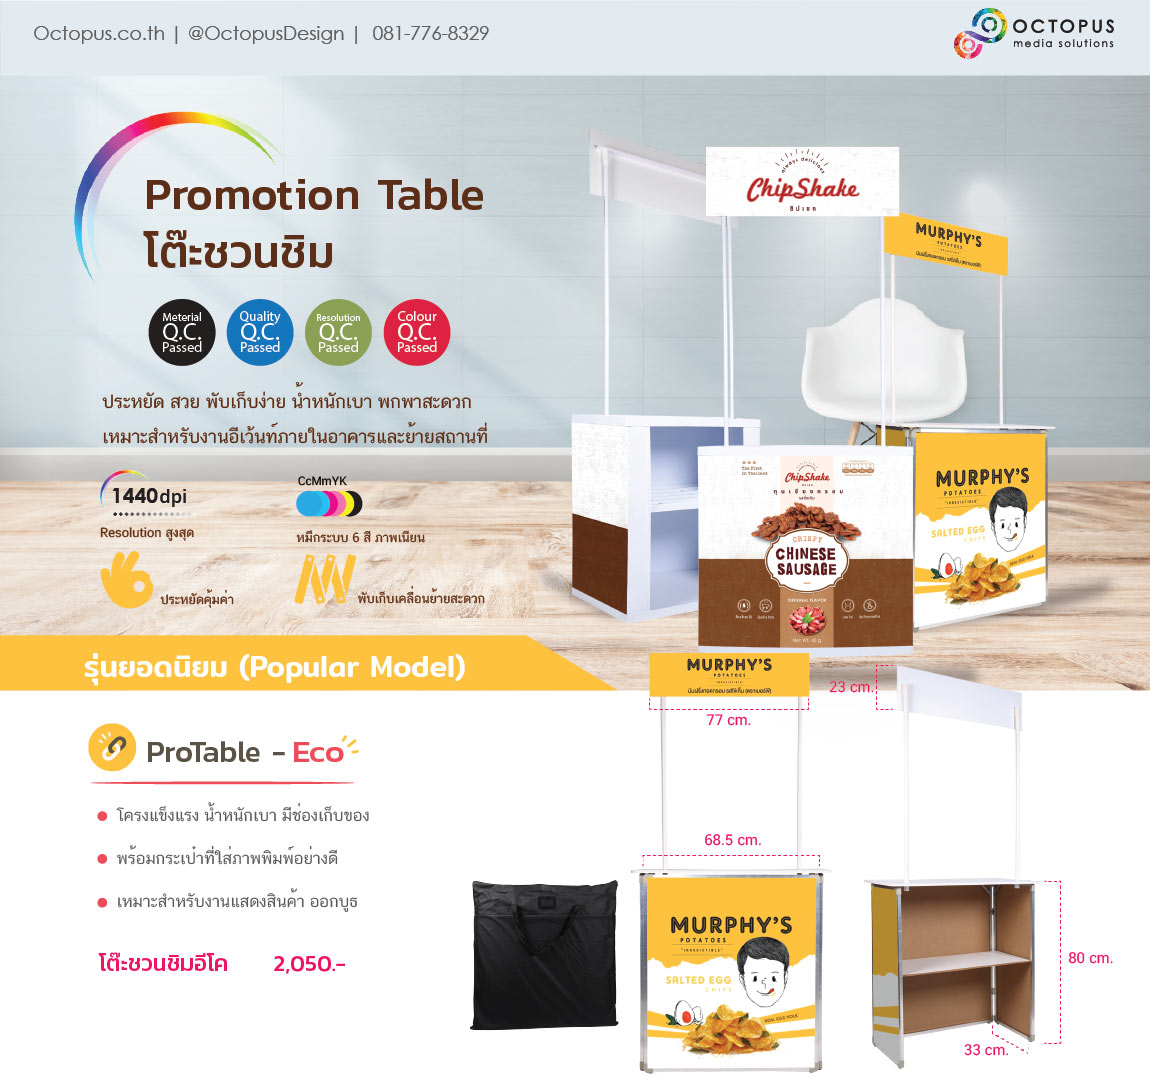 design shop We make tasting tables, khim tea tables, and ready-made booth equipment. Cheap event equipment, booth tables, ready to ship, marketing promotion media.